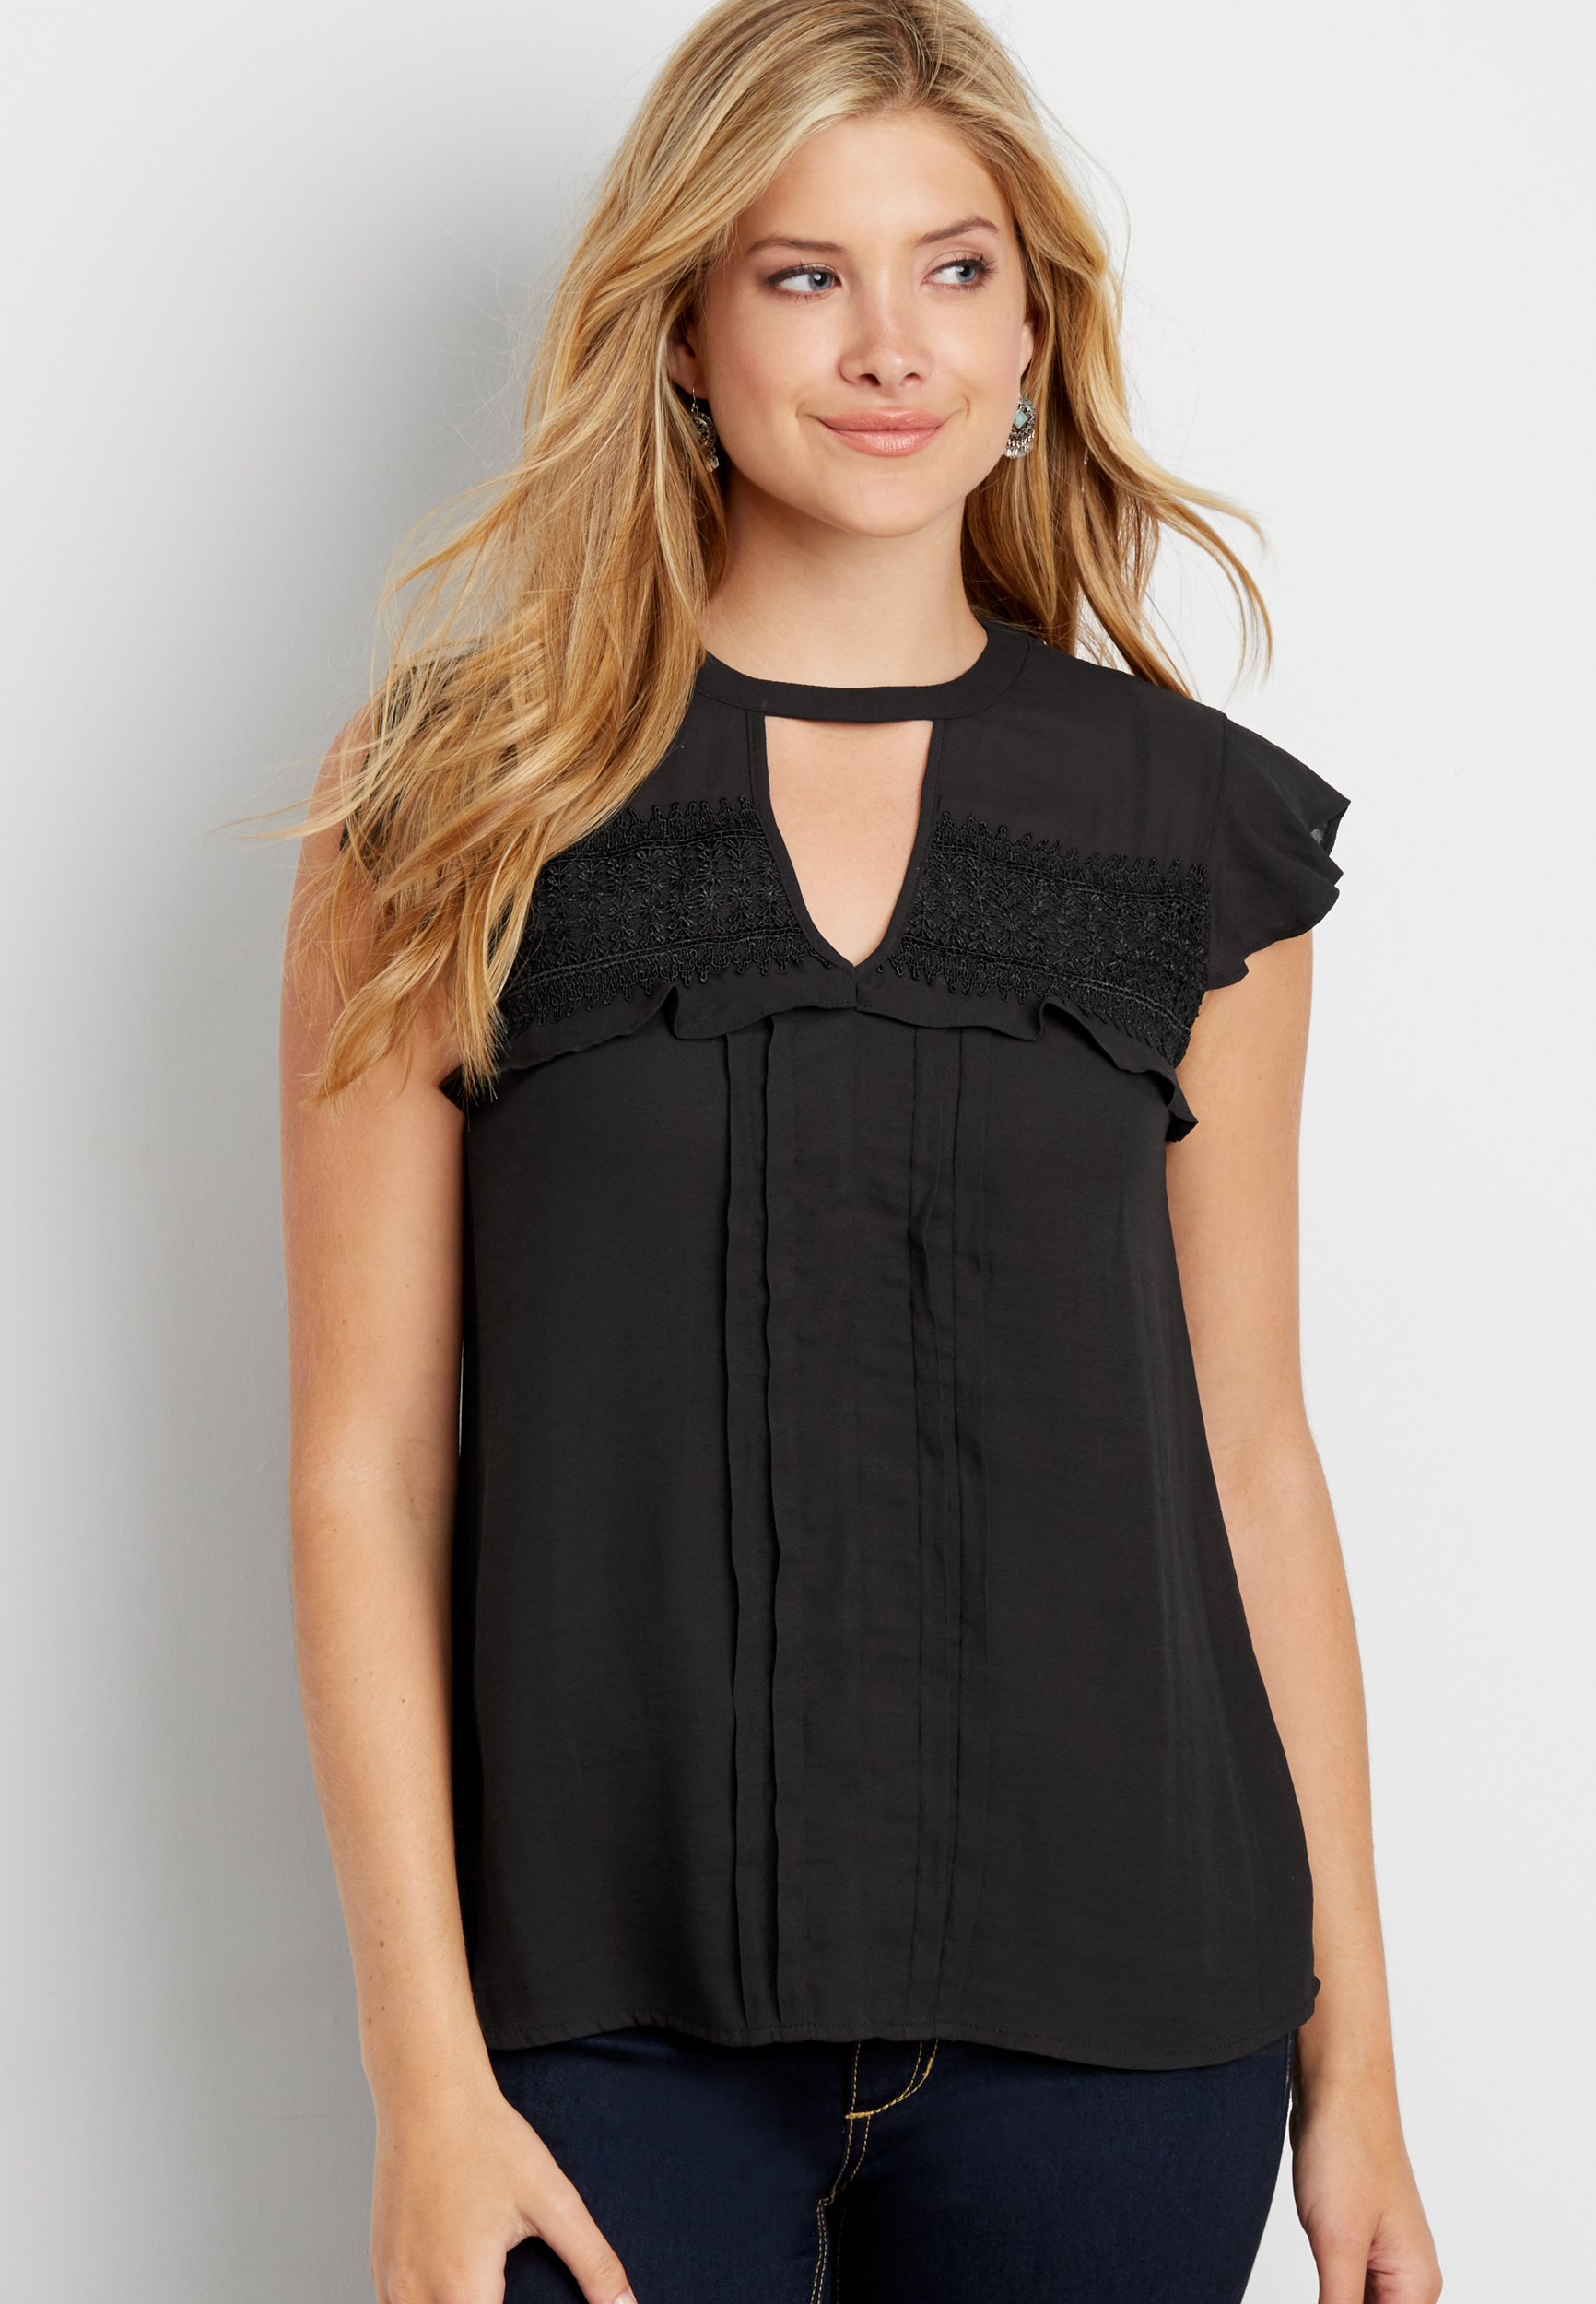 chiffon blouse with pleating and crocheted overlay | maurices